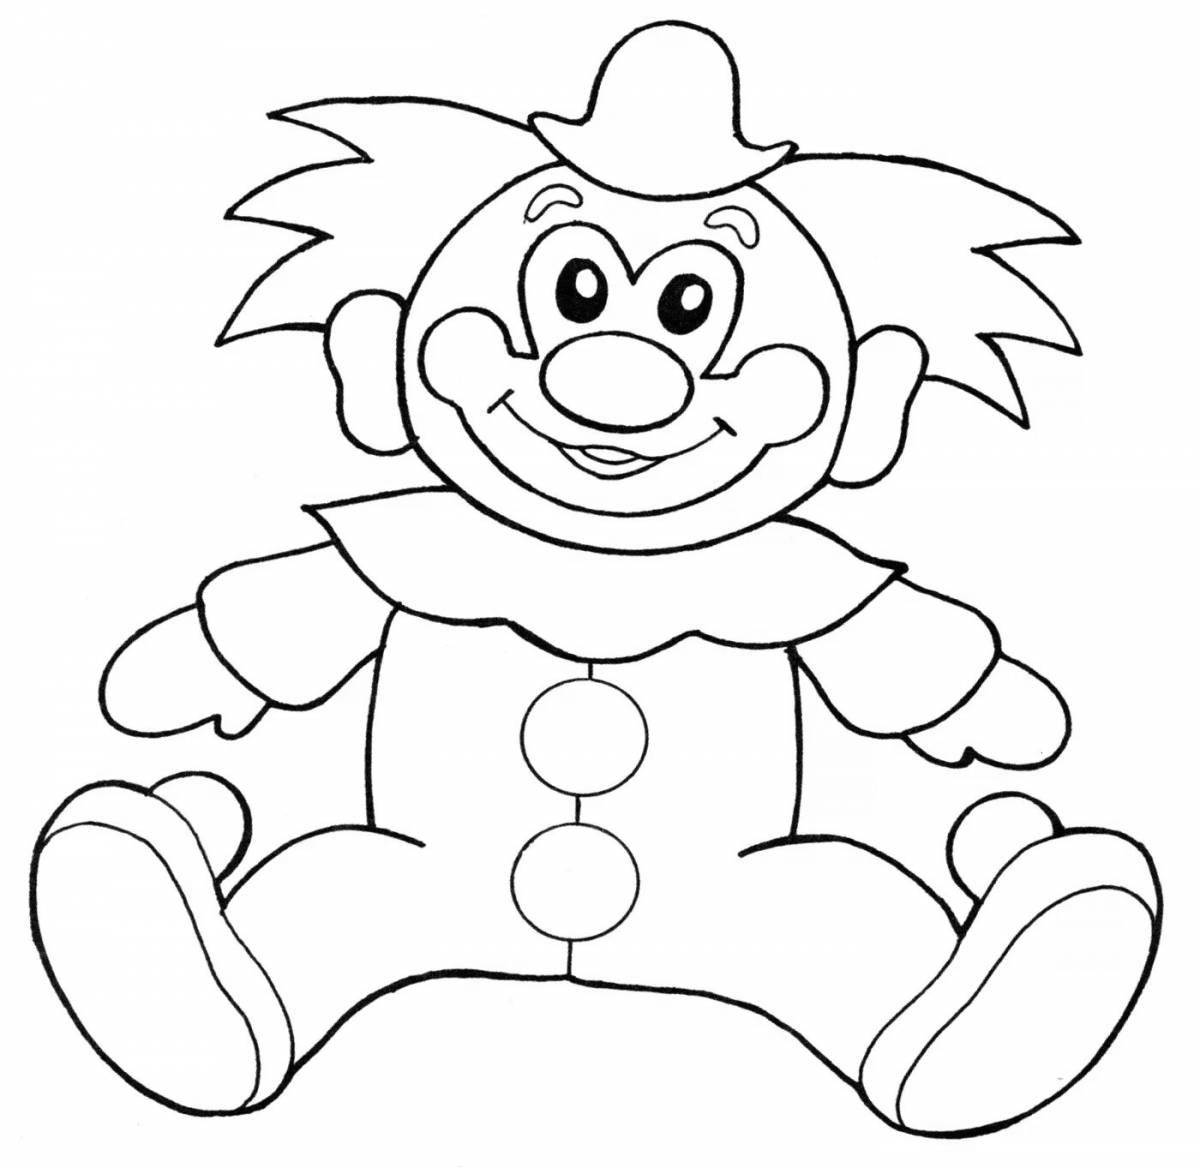 Funny clown coloring book for kids